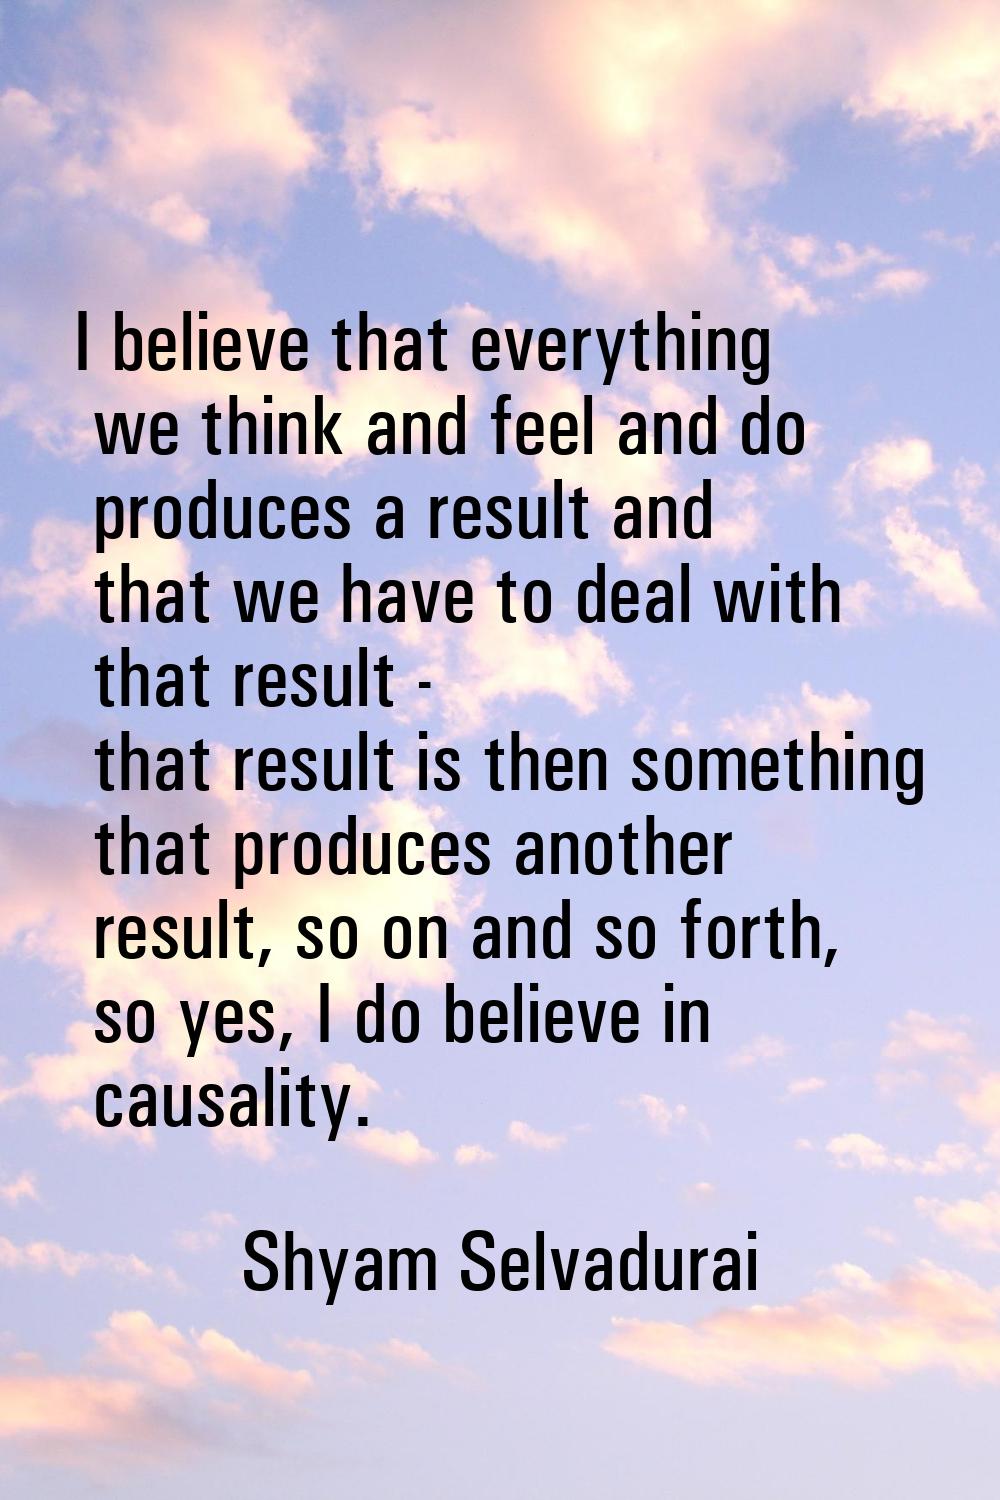 I believe that everything we think and feel and do produces a result and that we have to deal with 